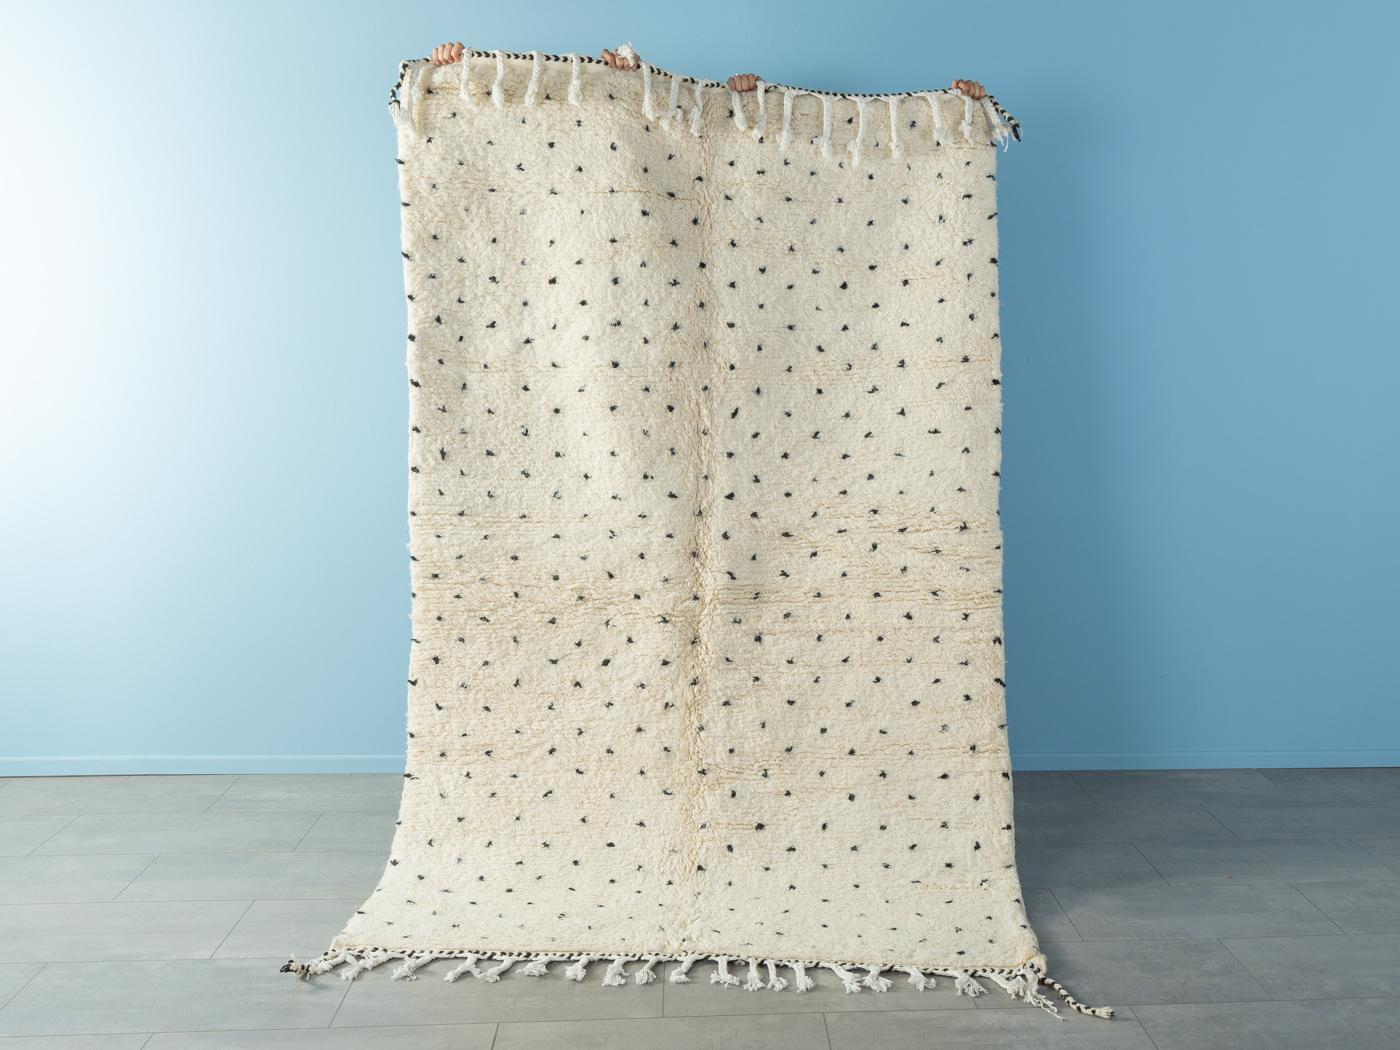 Dalmatian III is a contemporary 100% wool rug – thick and soft, comfortable underfoot. Our Berber rugs are handwoven and handknotted by Amazigh women in the Atlas Mountains. These communities have been crafting rugs for thousands of years. One knot